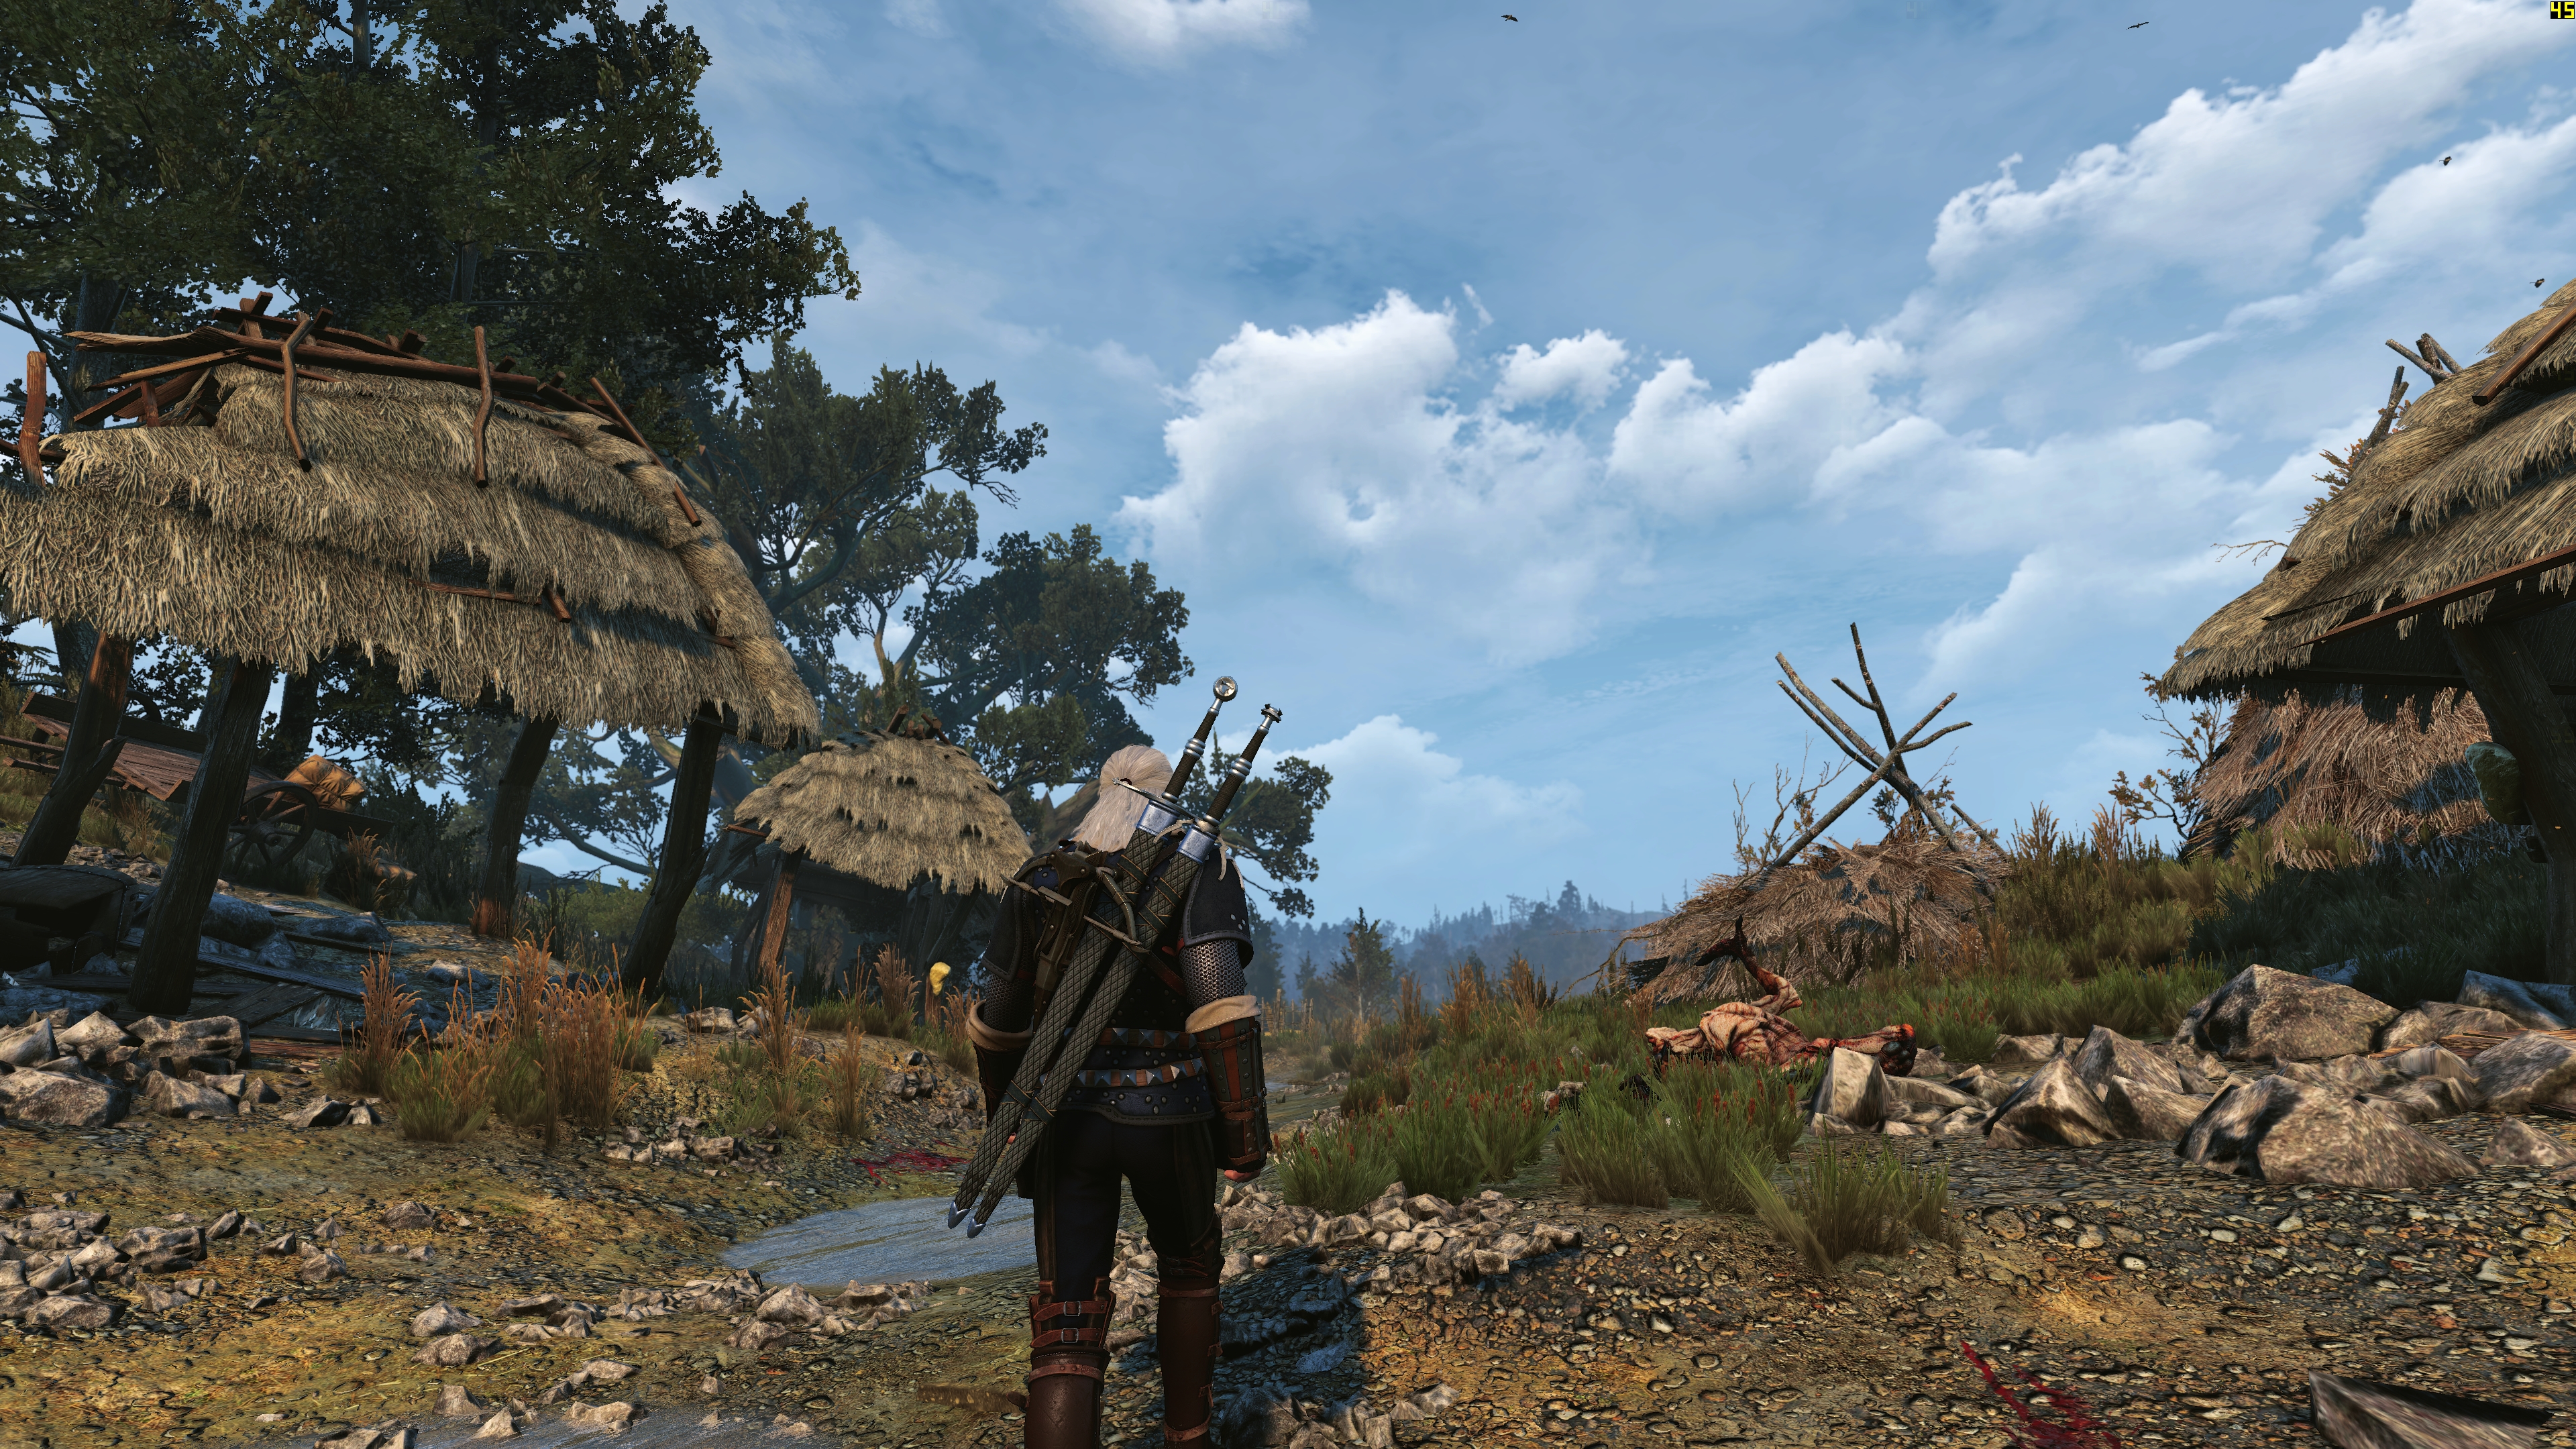 General 3840x2160 The Witcher 3: Wild Hunt RPG Geralt of Rivia The Witcher video games Skellige CD Projekt RED video game characters book characters